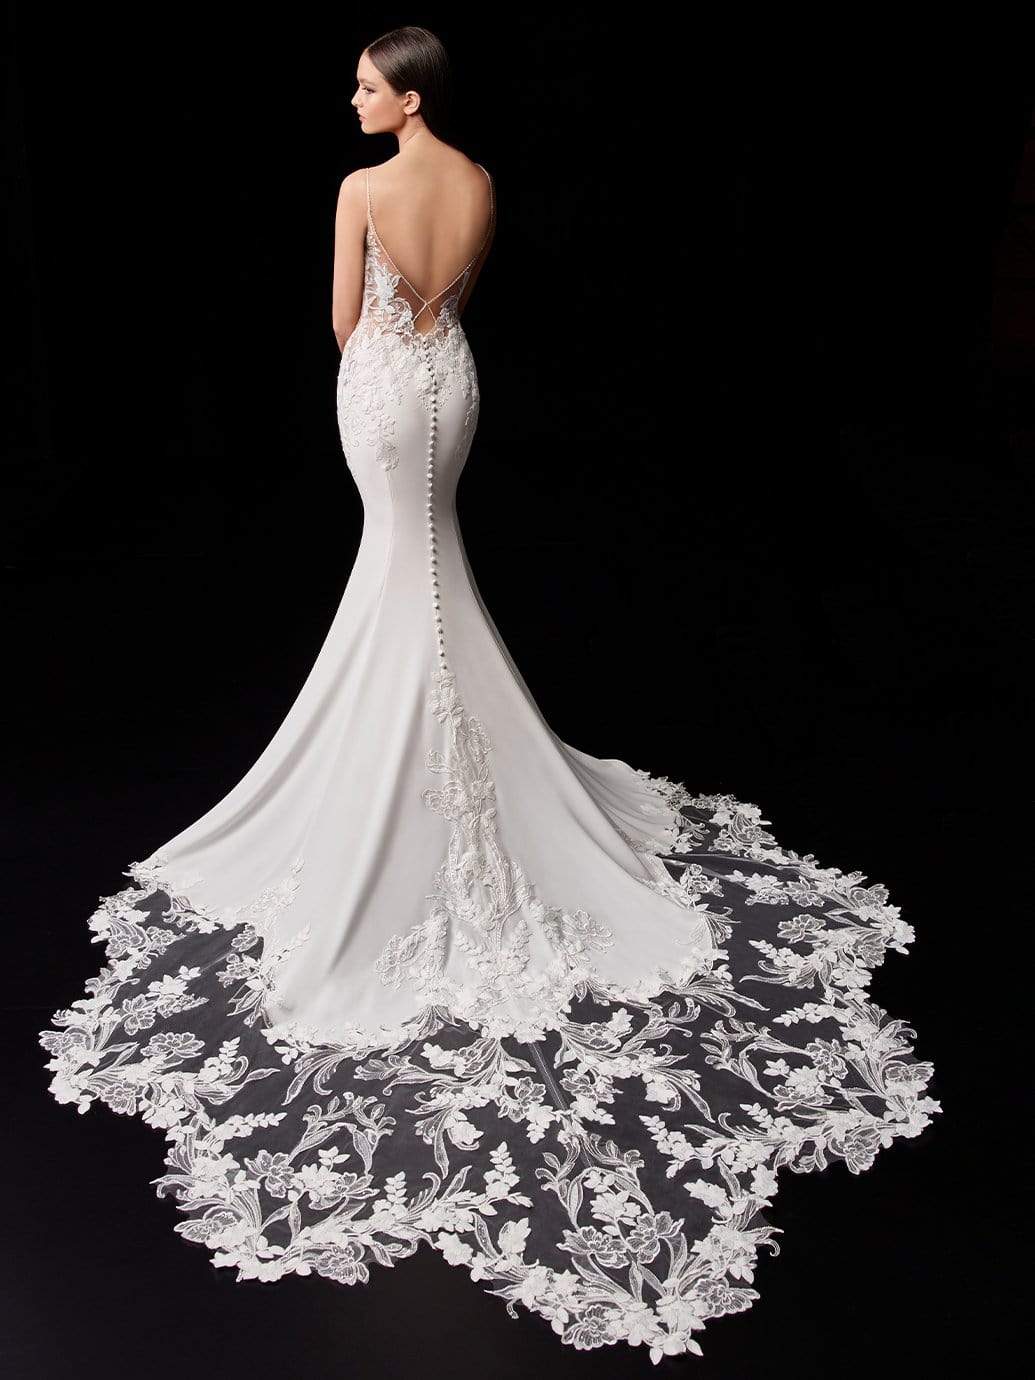 Magnolia Wedding Dress Designed By Enzoani for Blue Collection Now